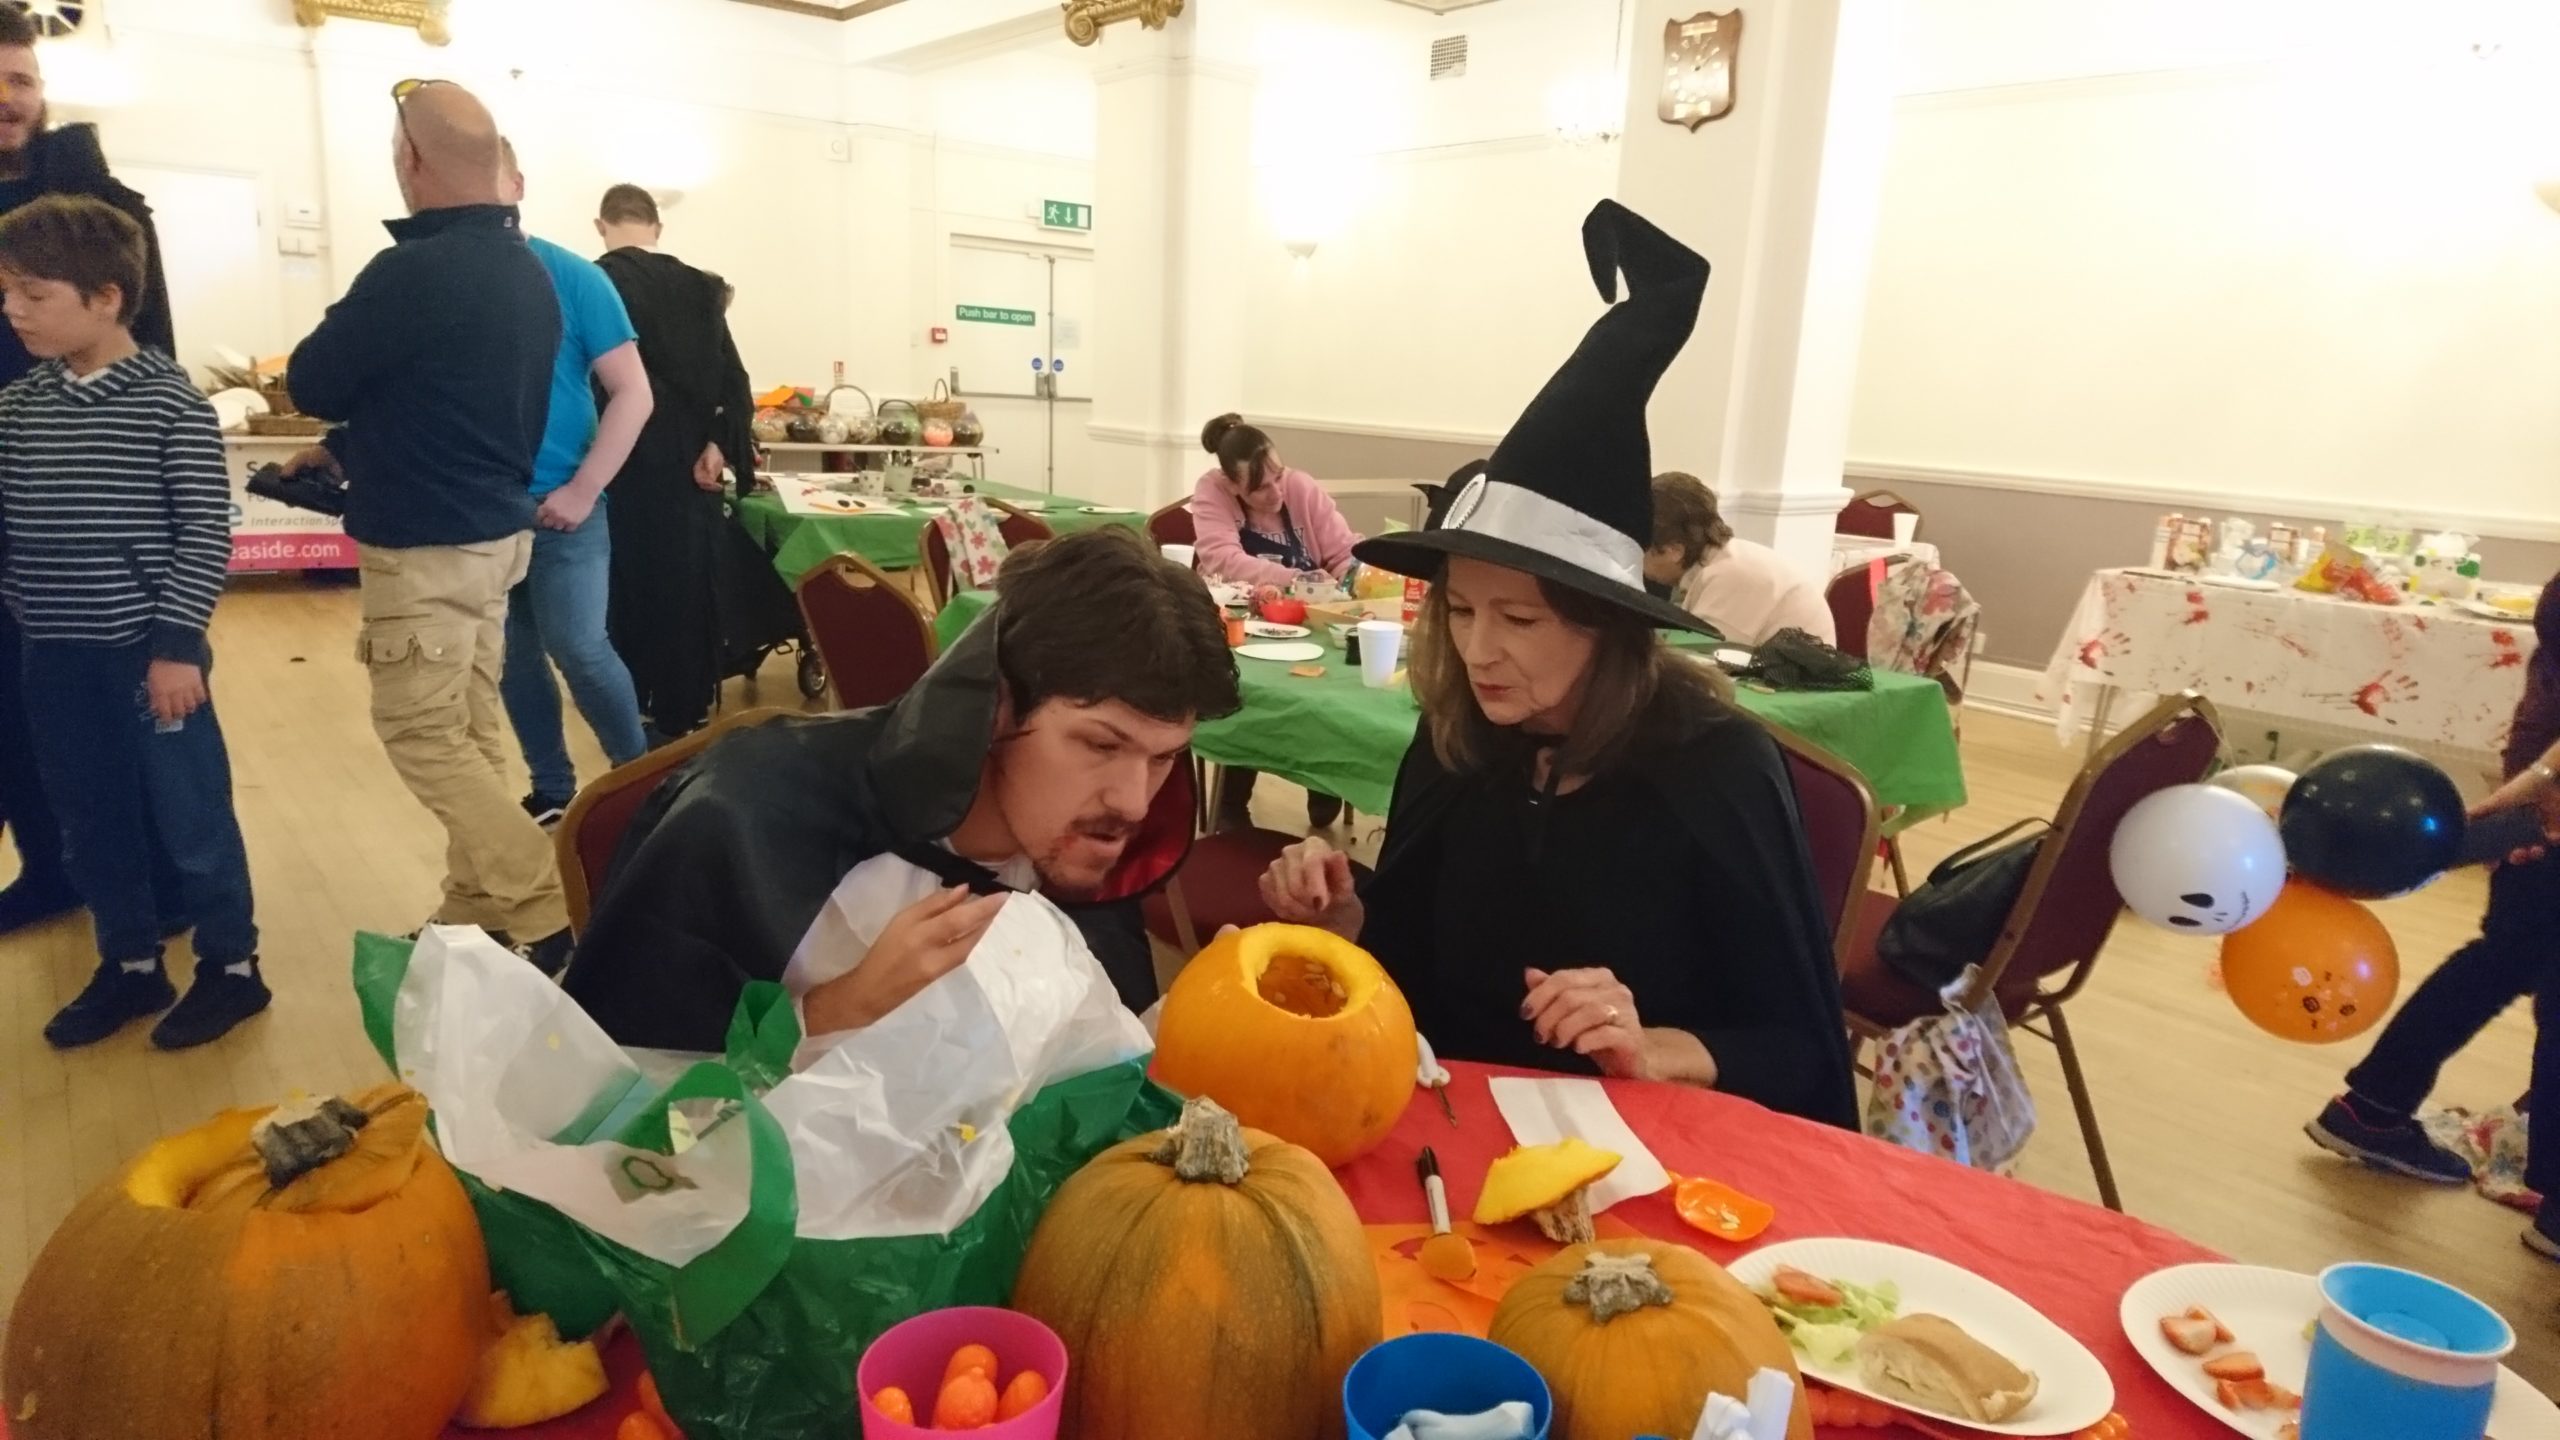 A woman wearing a witch hat for Halloween and a man hand carving pumpkins